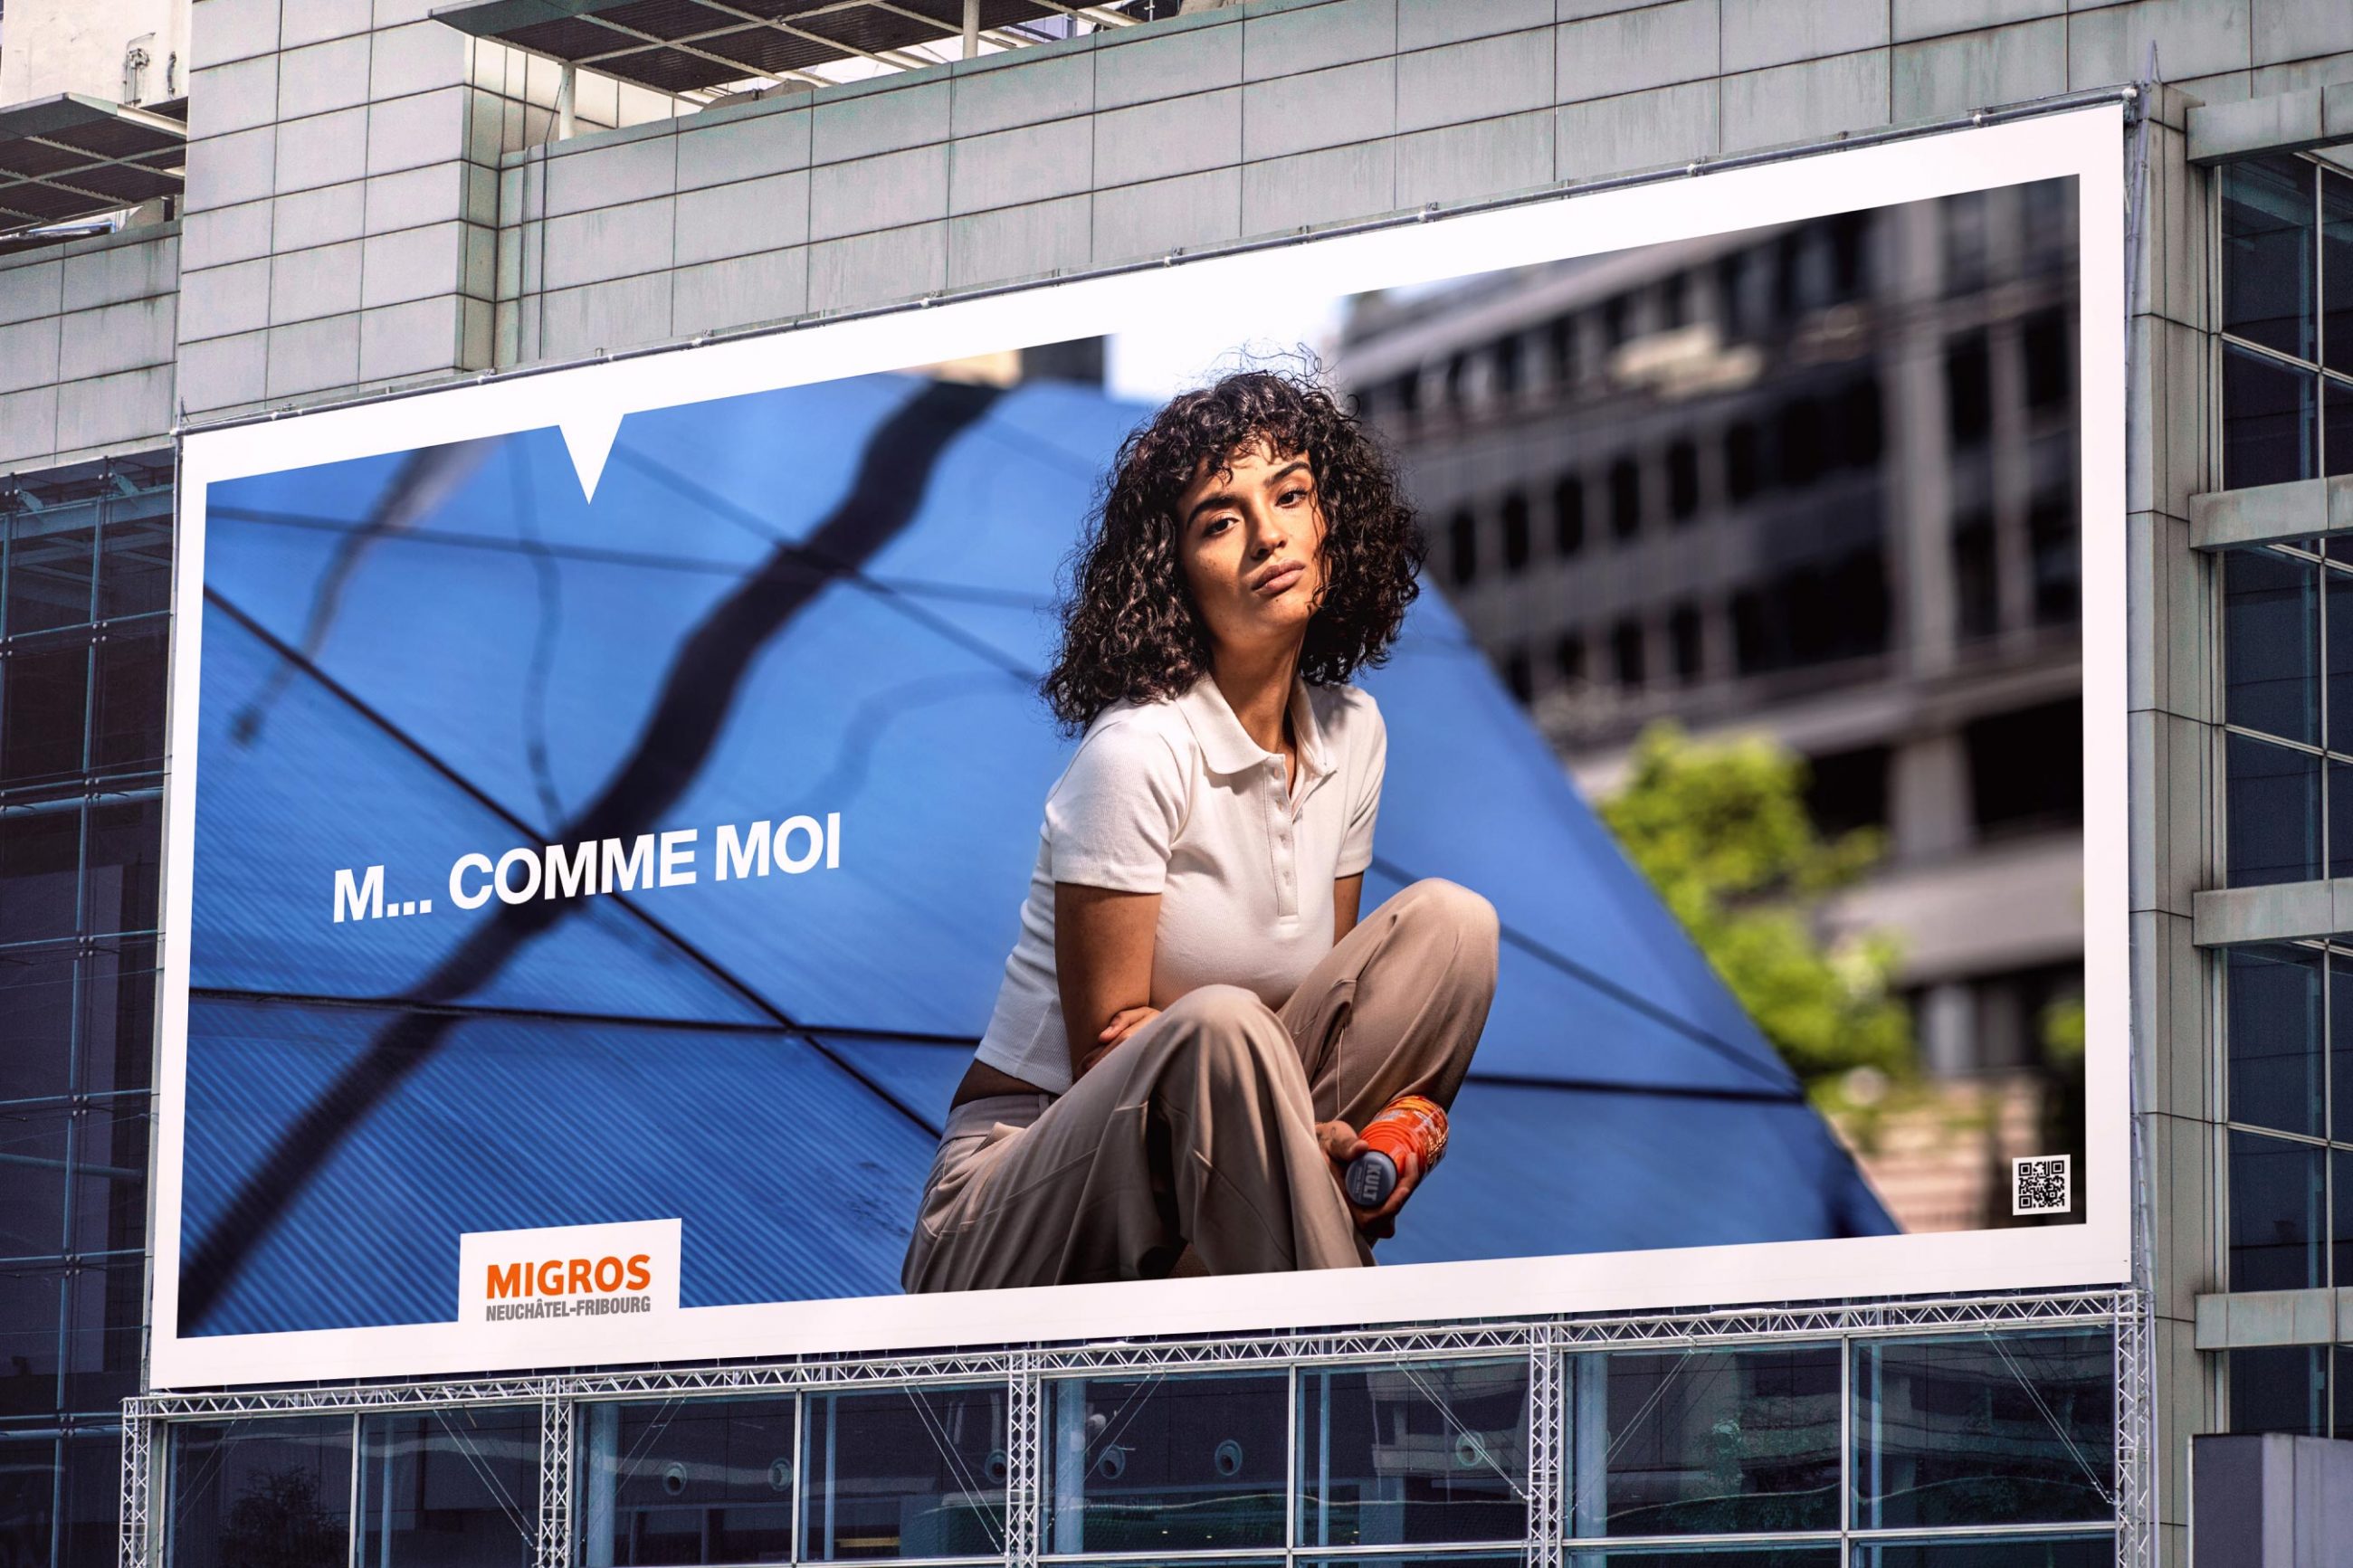 Campagne Migros, M comme moi